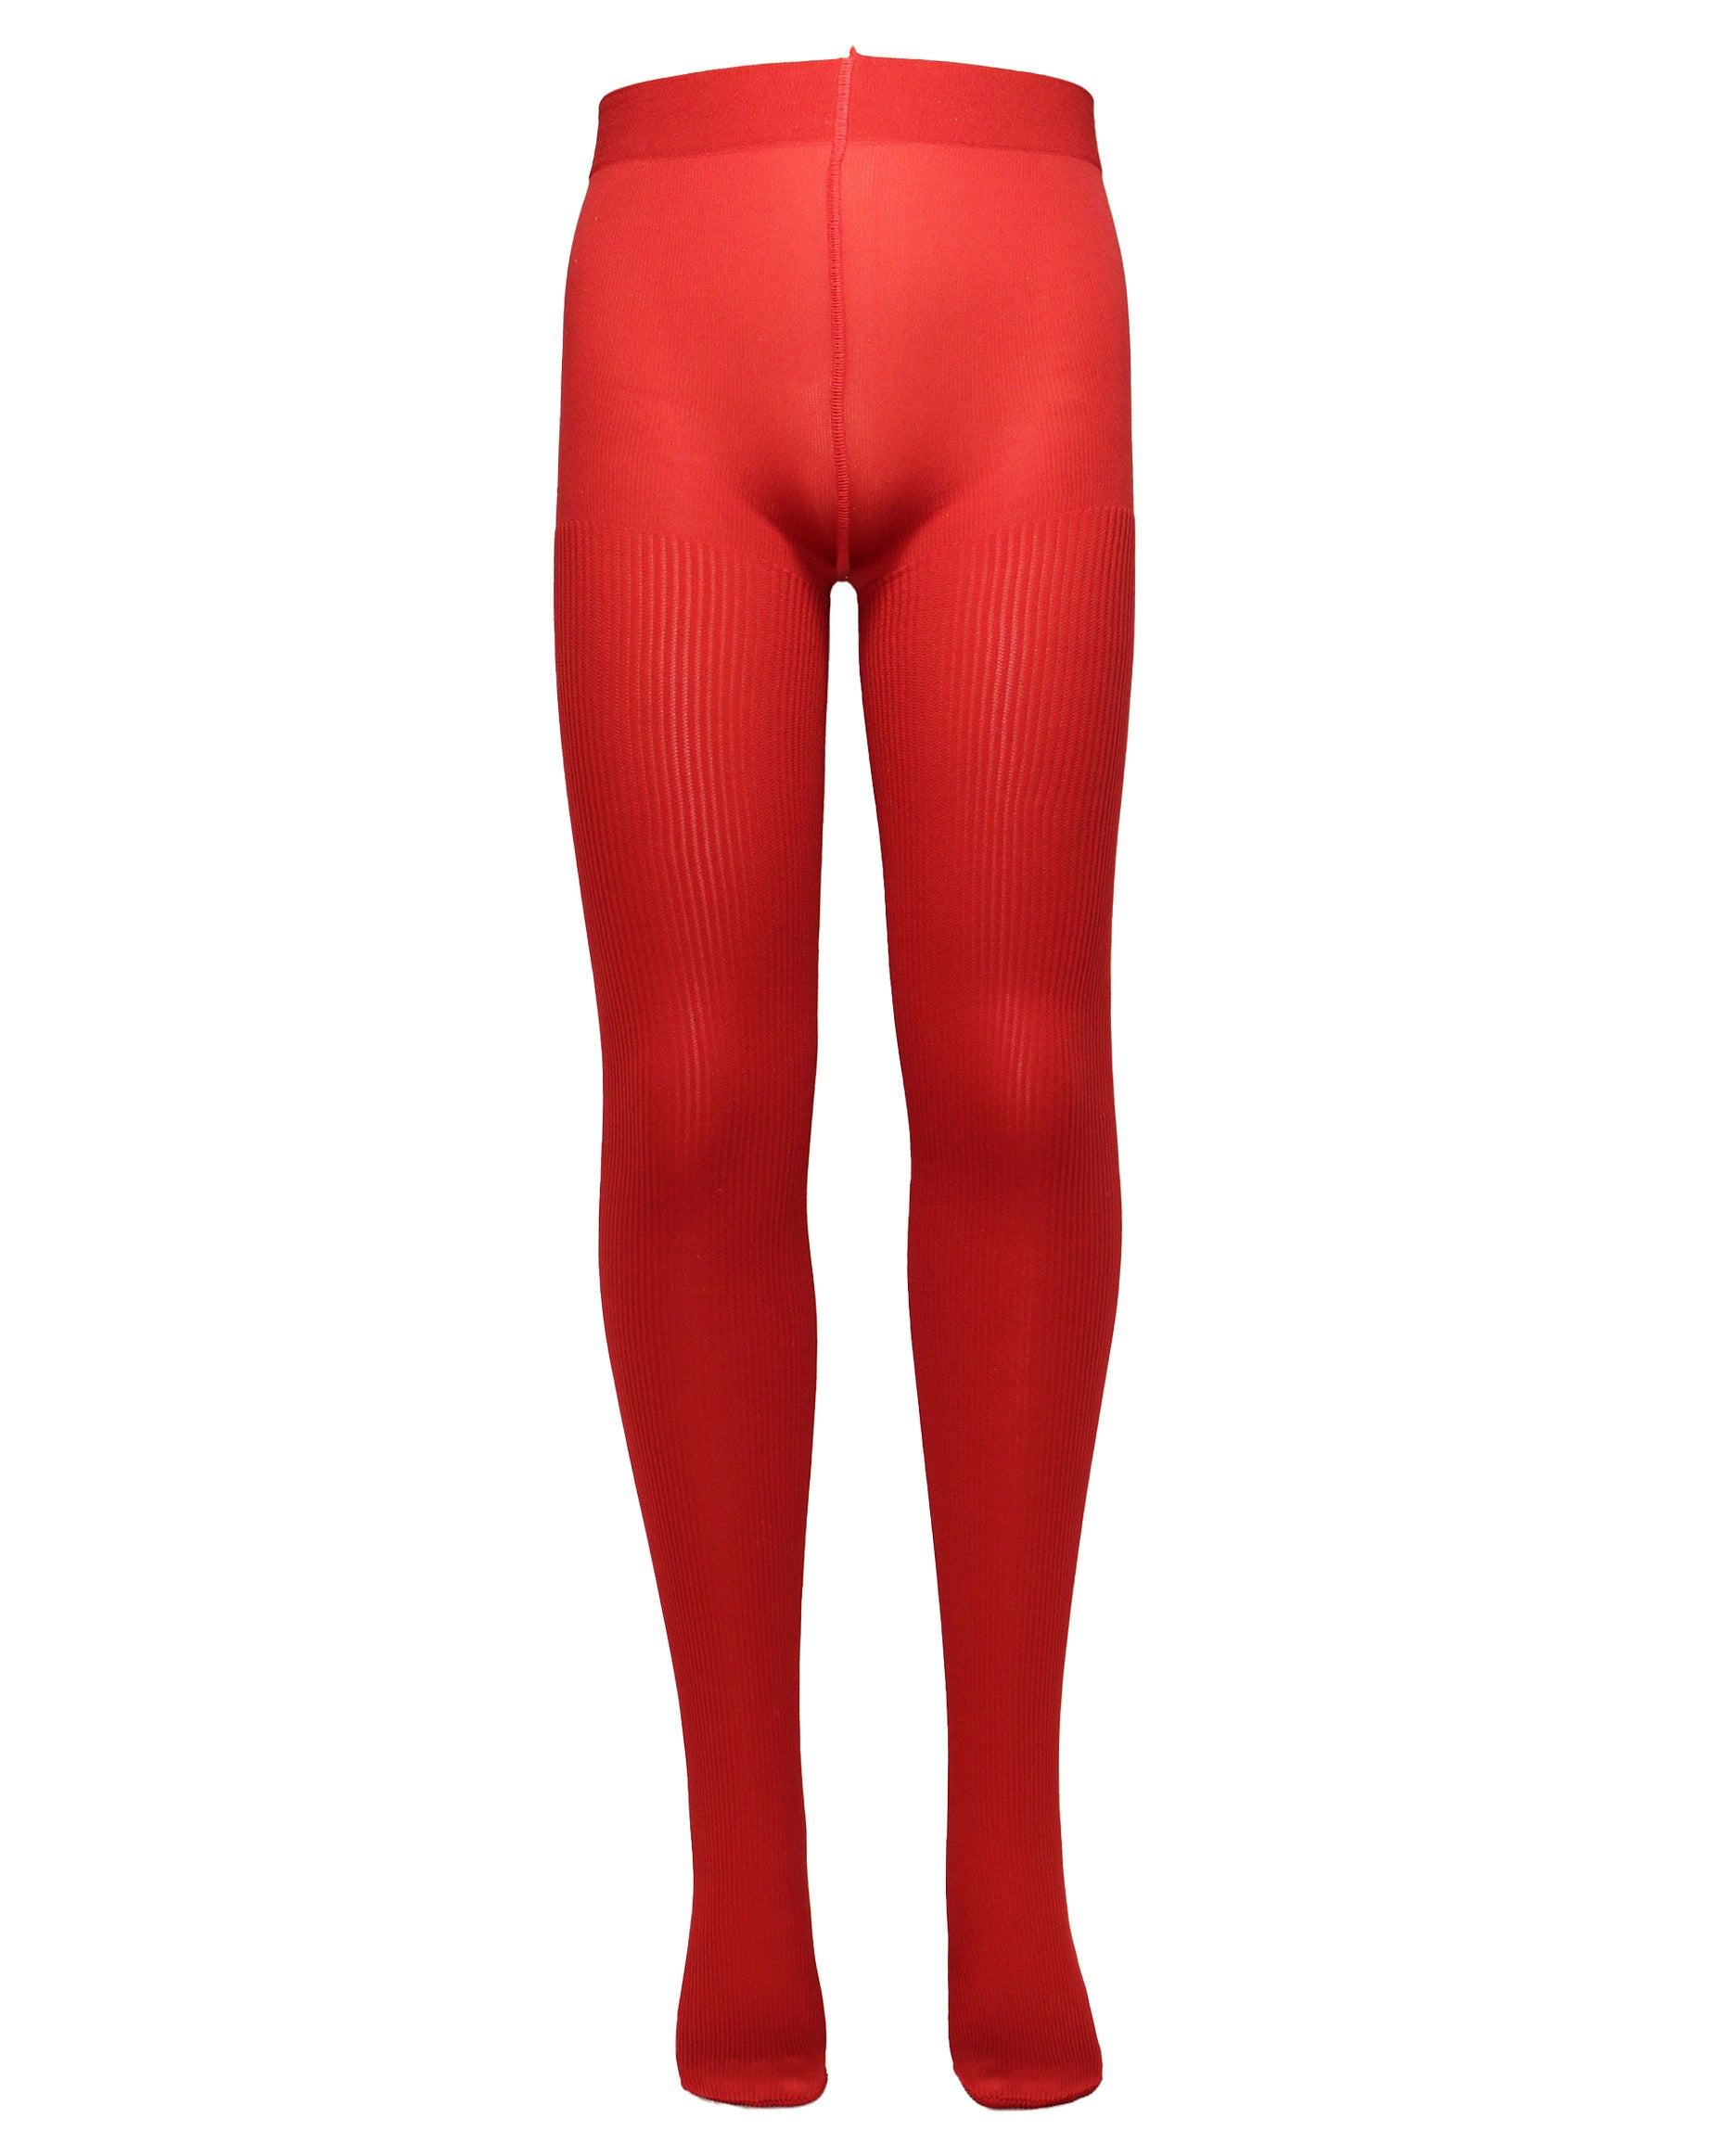 Omsa Serenella Cinderella Collant - Red soft opaque ribbed children's tights with a plain smooth boxer top and deep comfort waist band.